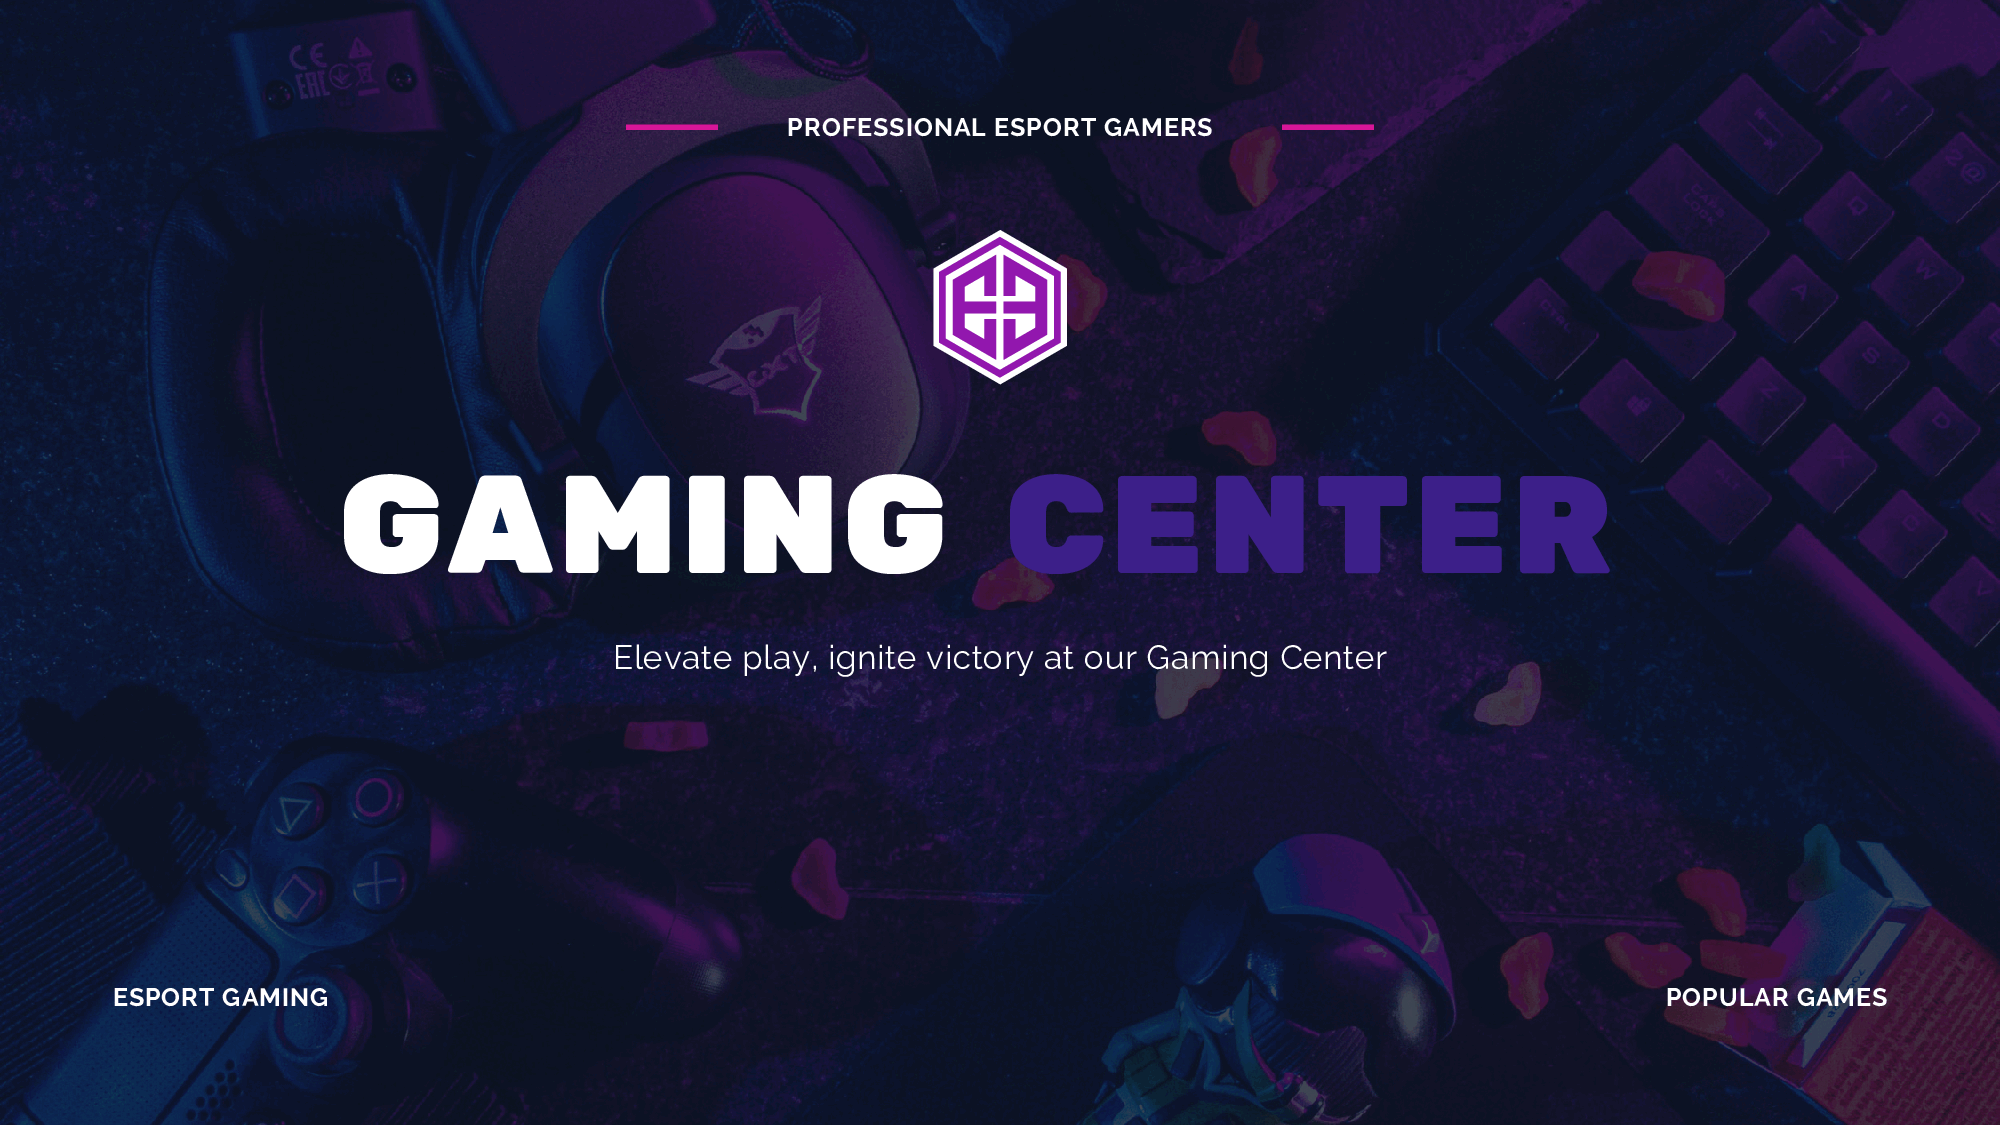 Gaming Center Pitch Deck Template